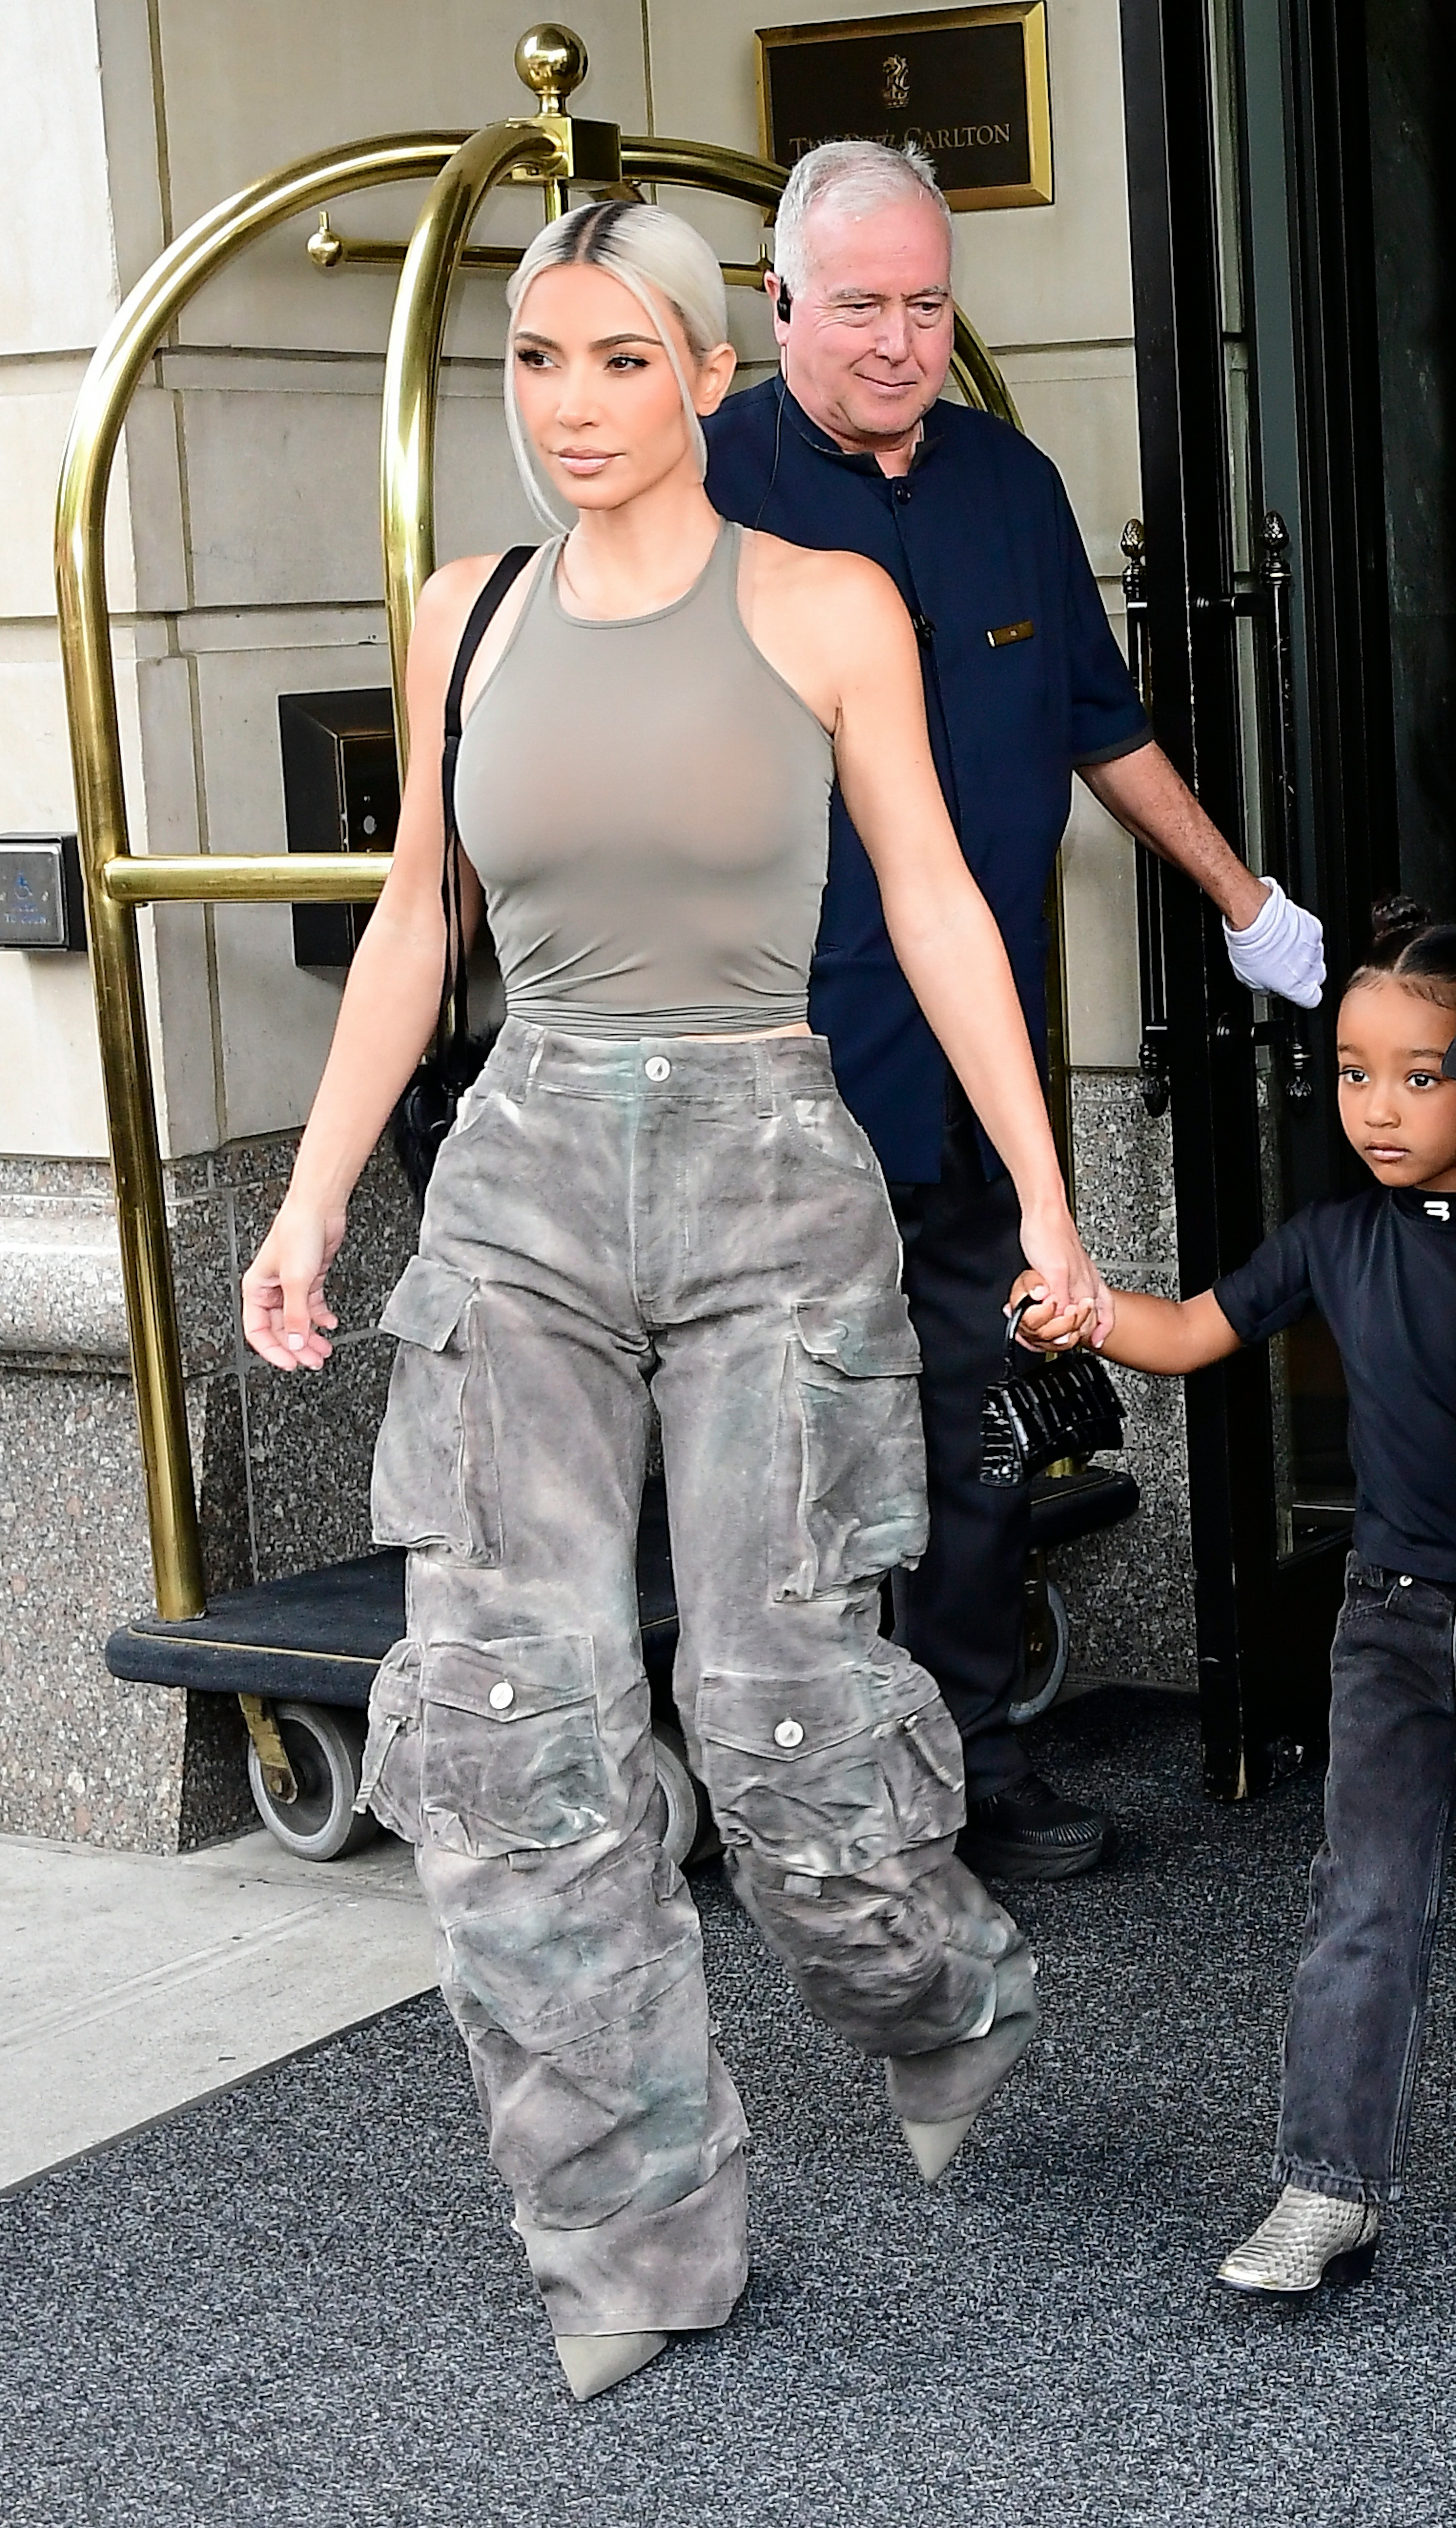 Cargo pants are getting a stylish makeover